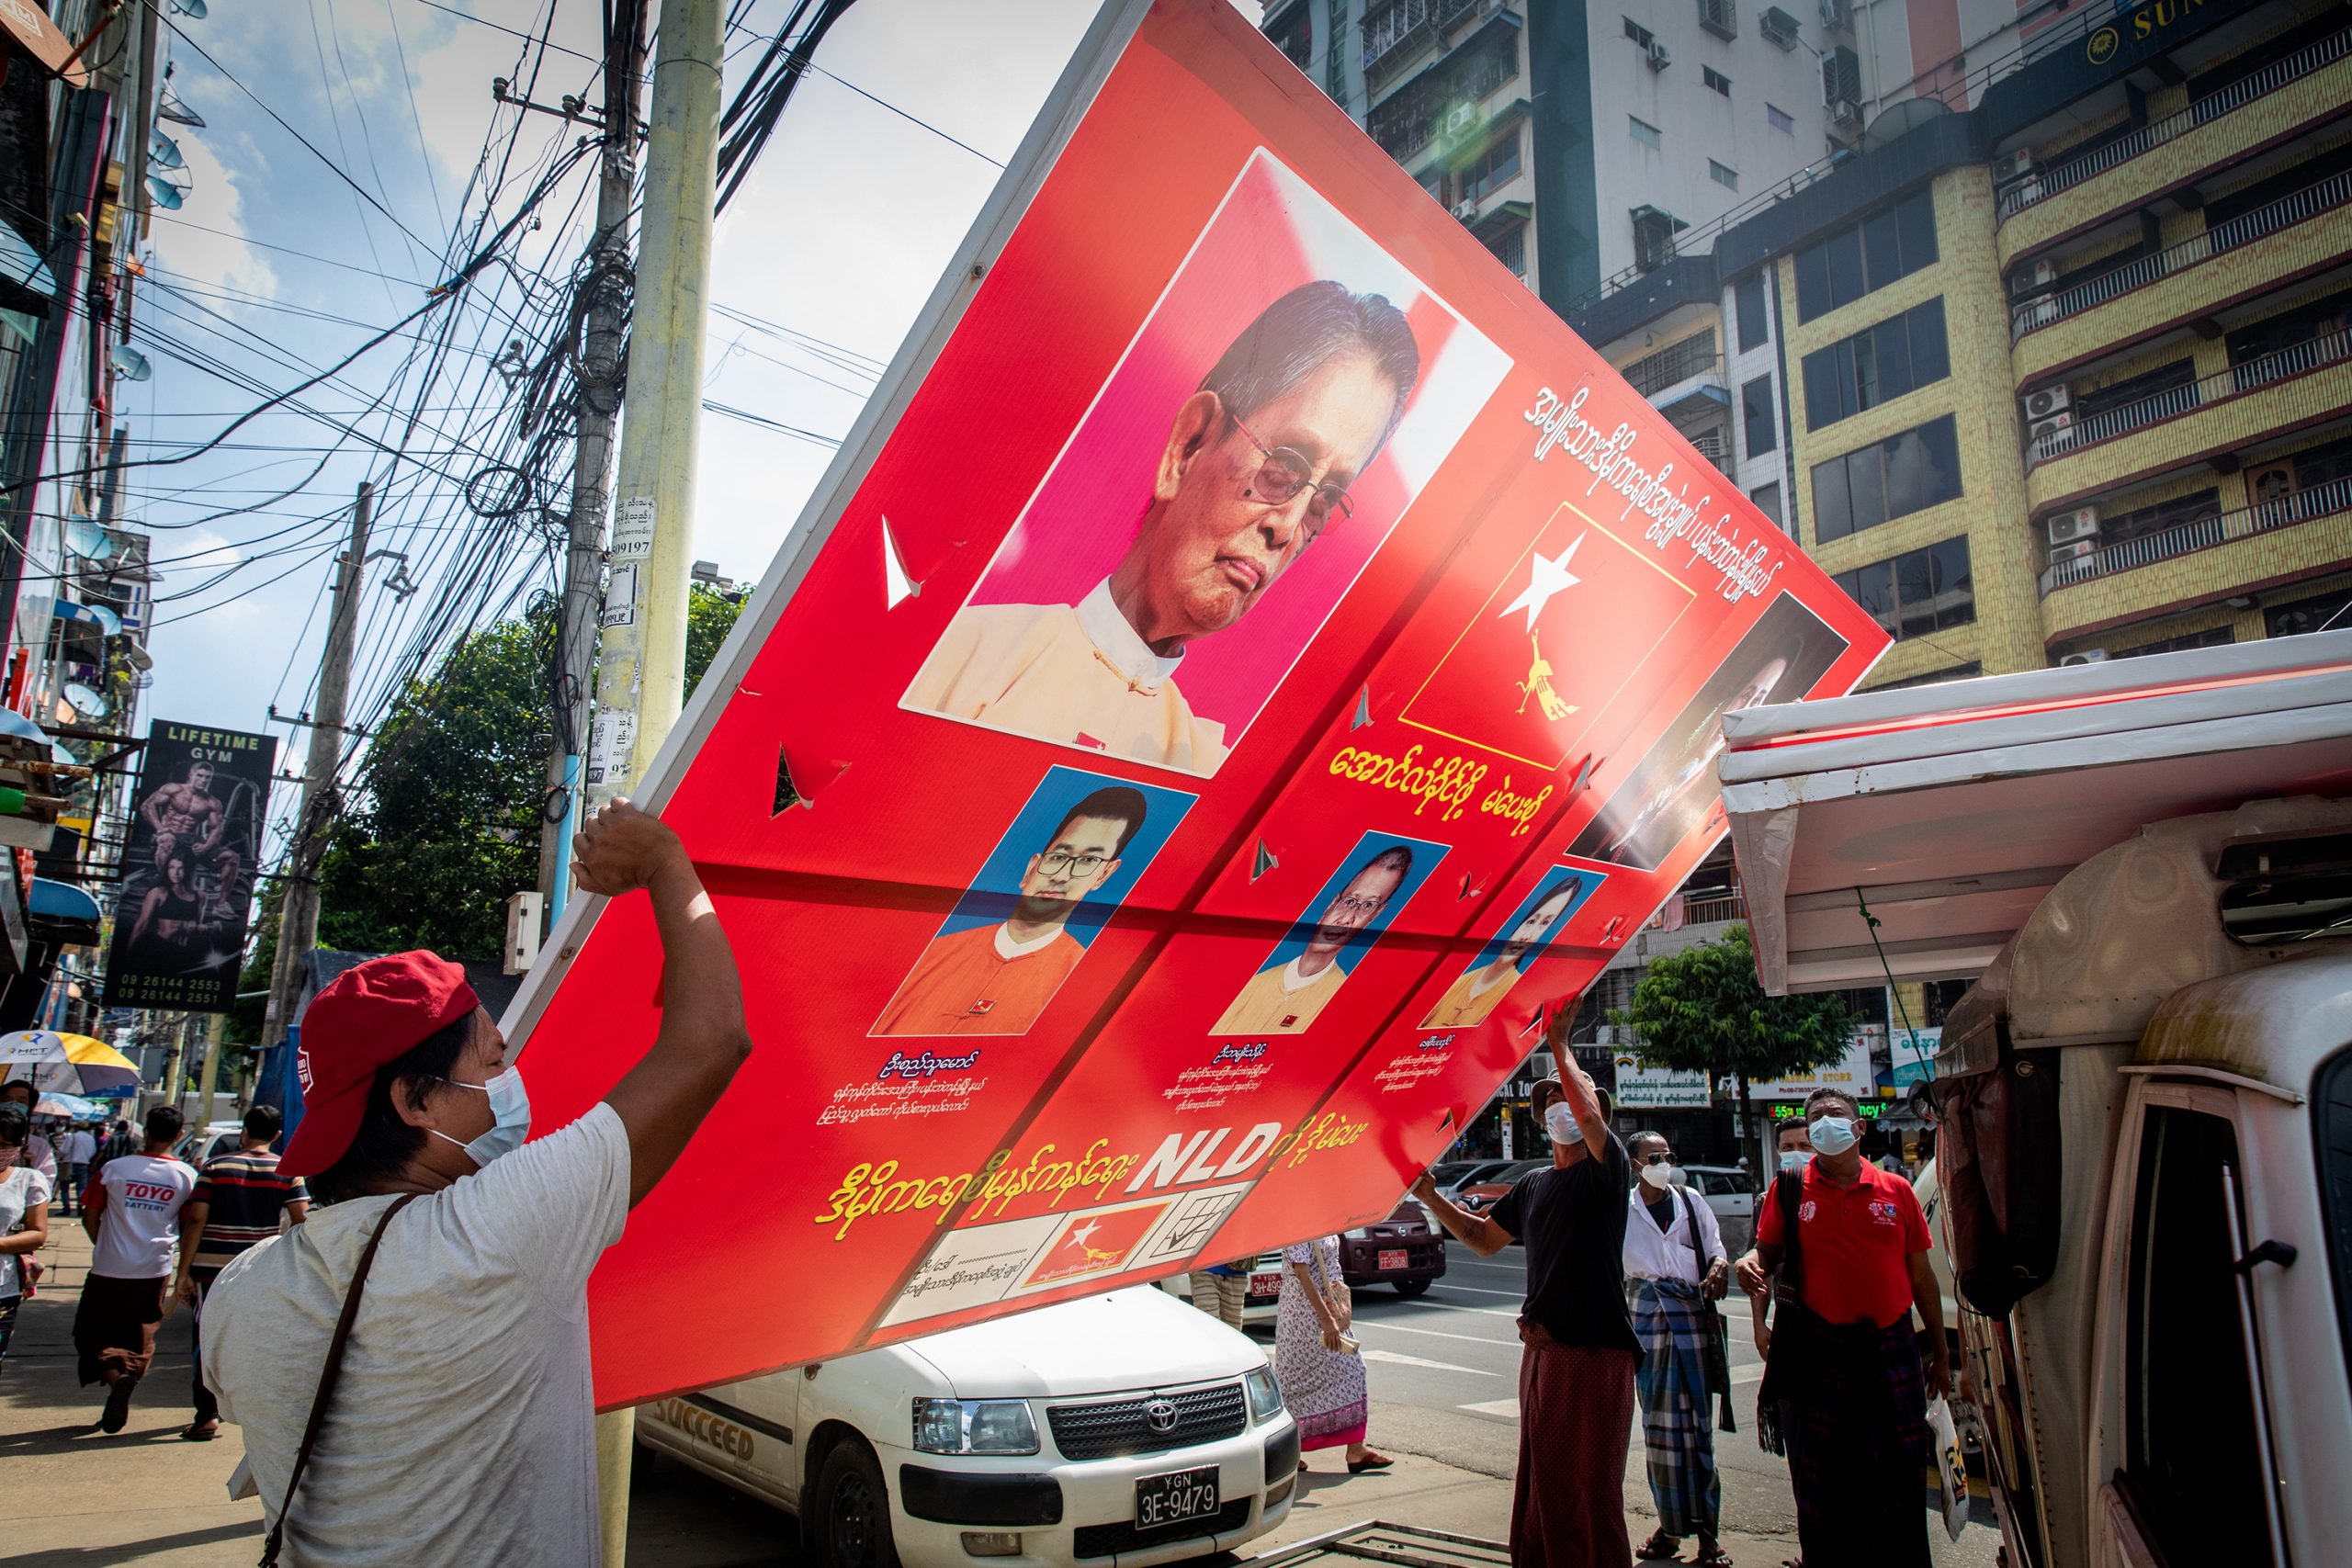 Workers in Yangon remove an NLD campaign poster ahead of the 2020 election, which the NLD won in a landslide. (Frontier)